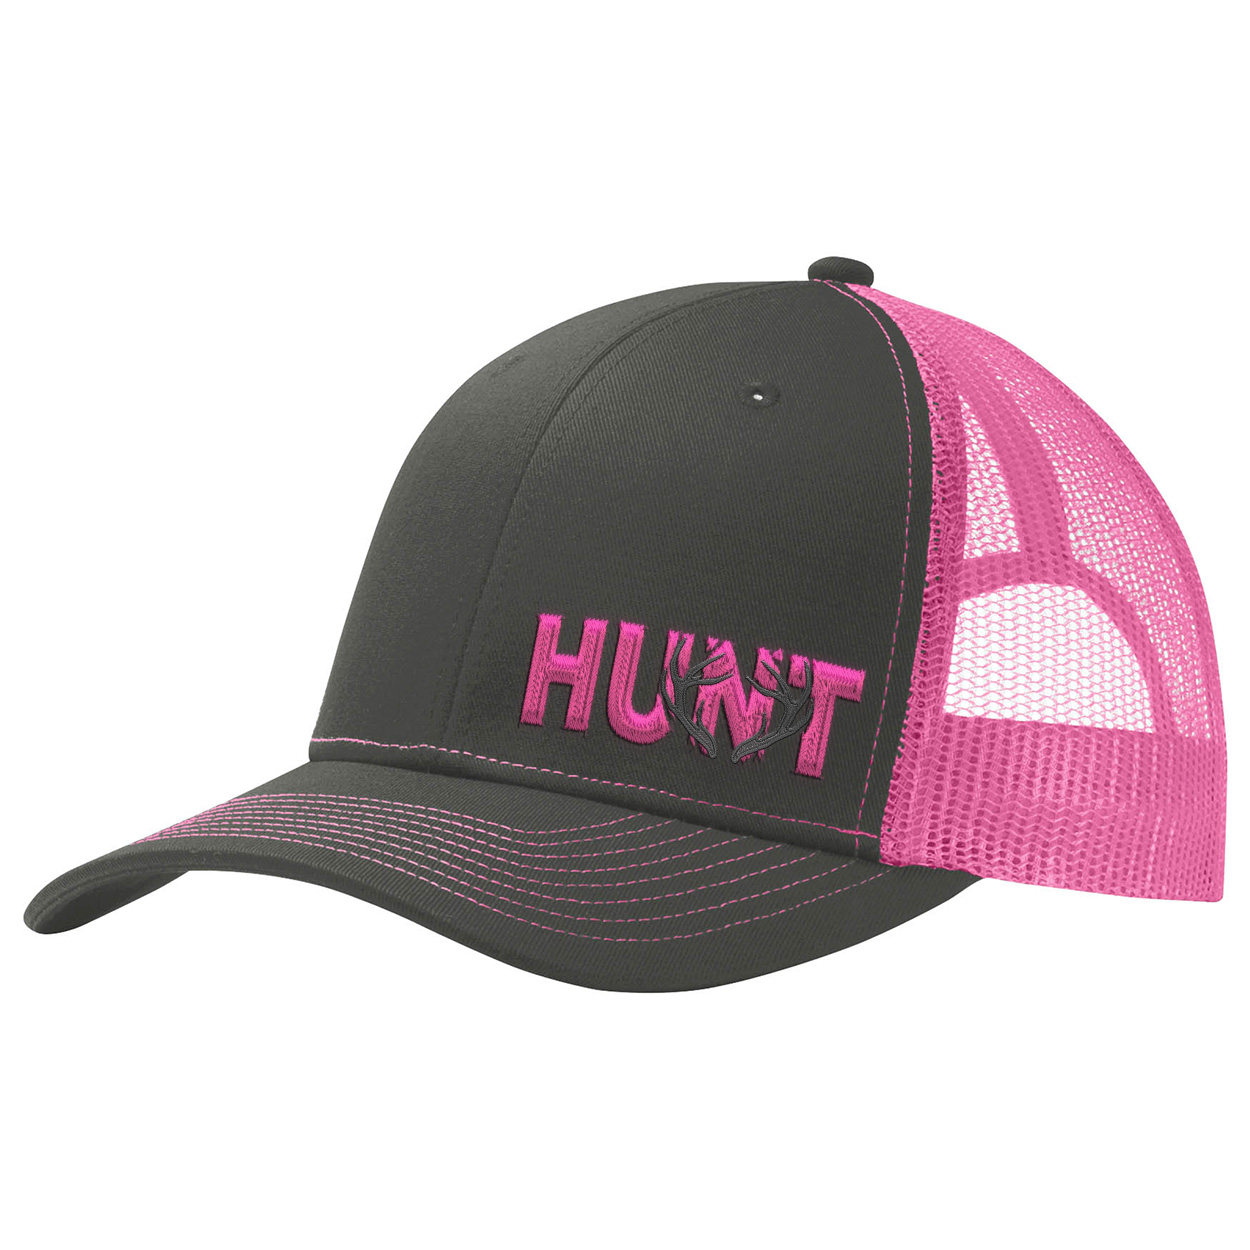 Hunt Rack Logo Night Out Pro Embroidered Snapback Trucker Hat Charcoal/Pink (Pink Logo)